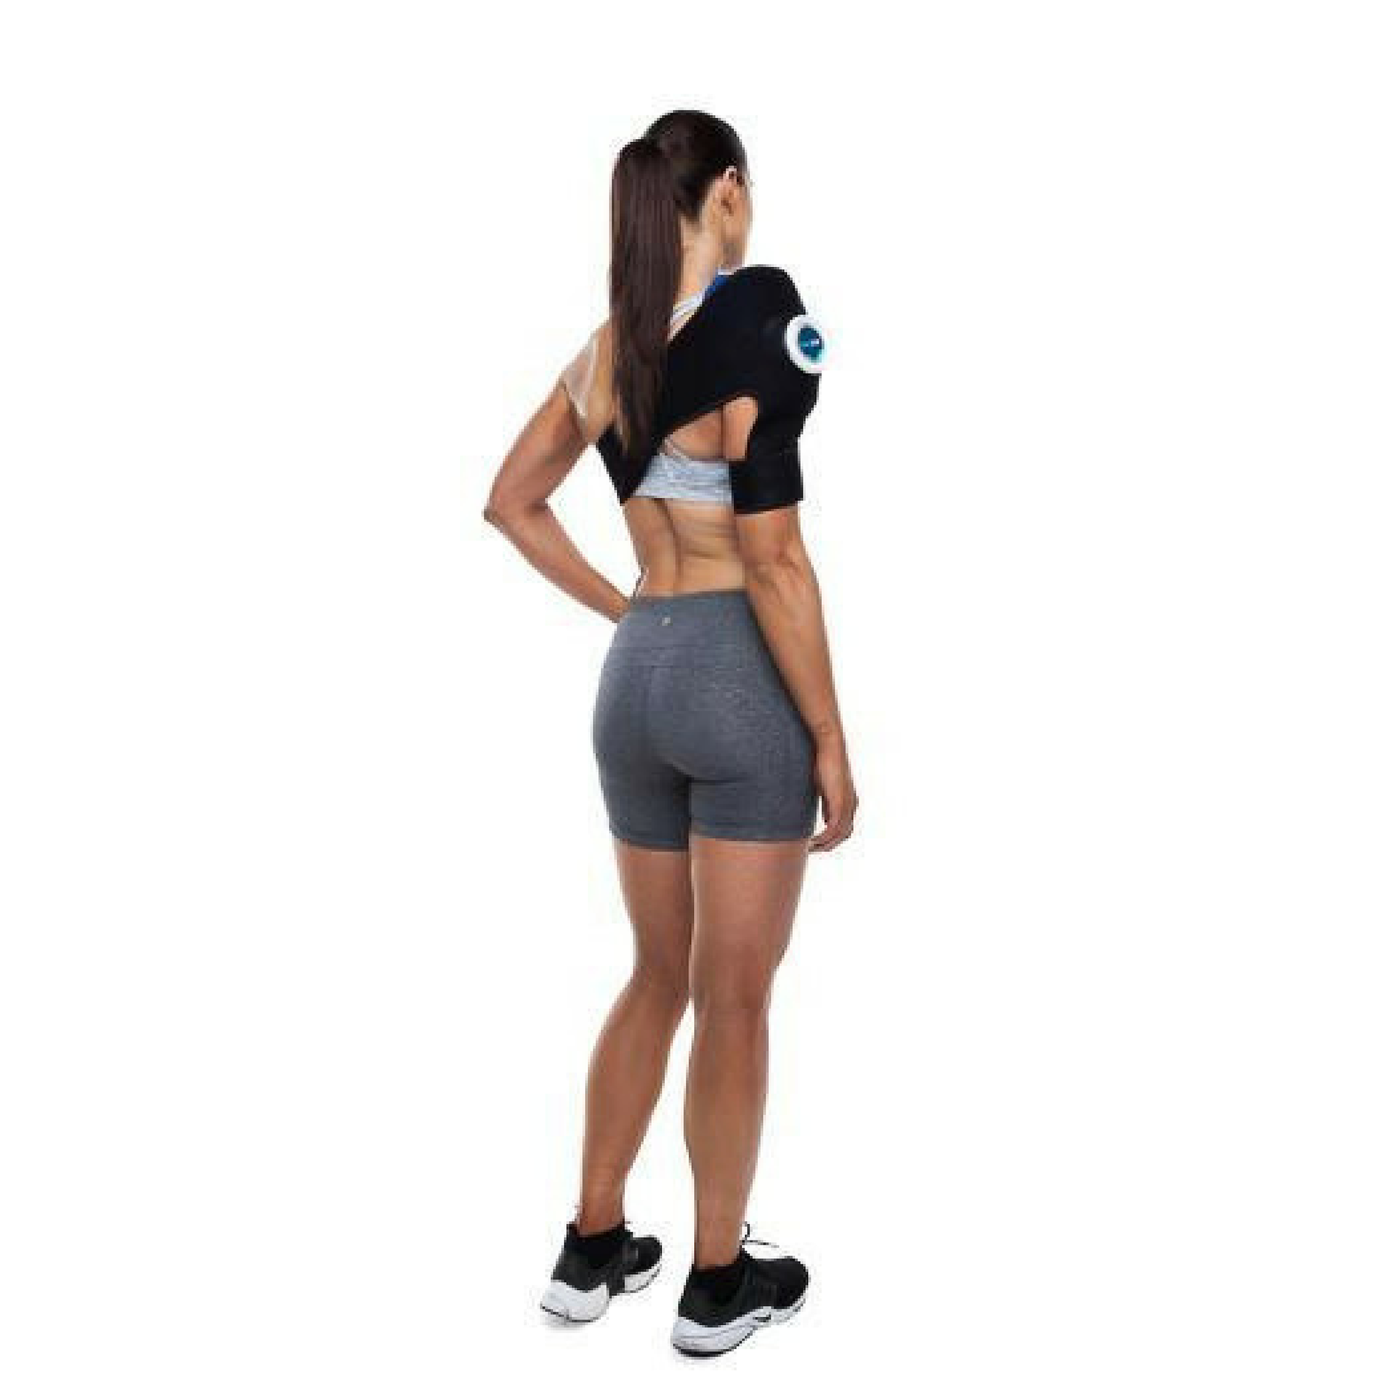 BodyICE Shoulder Set product in use Female